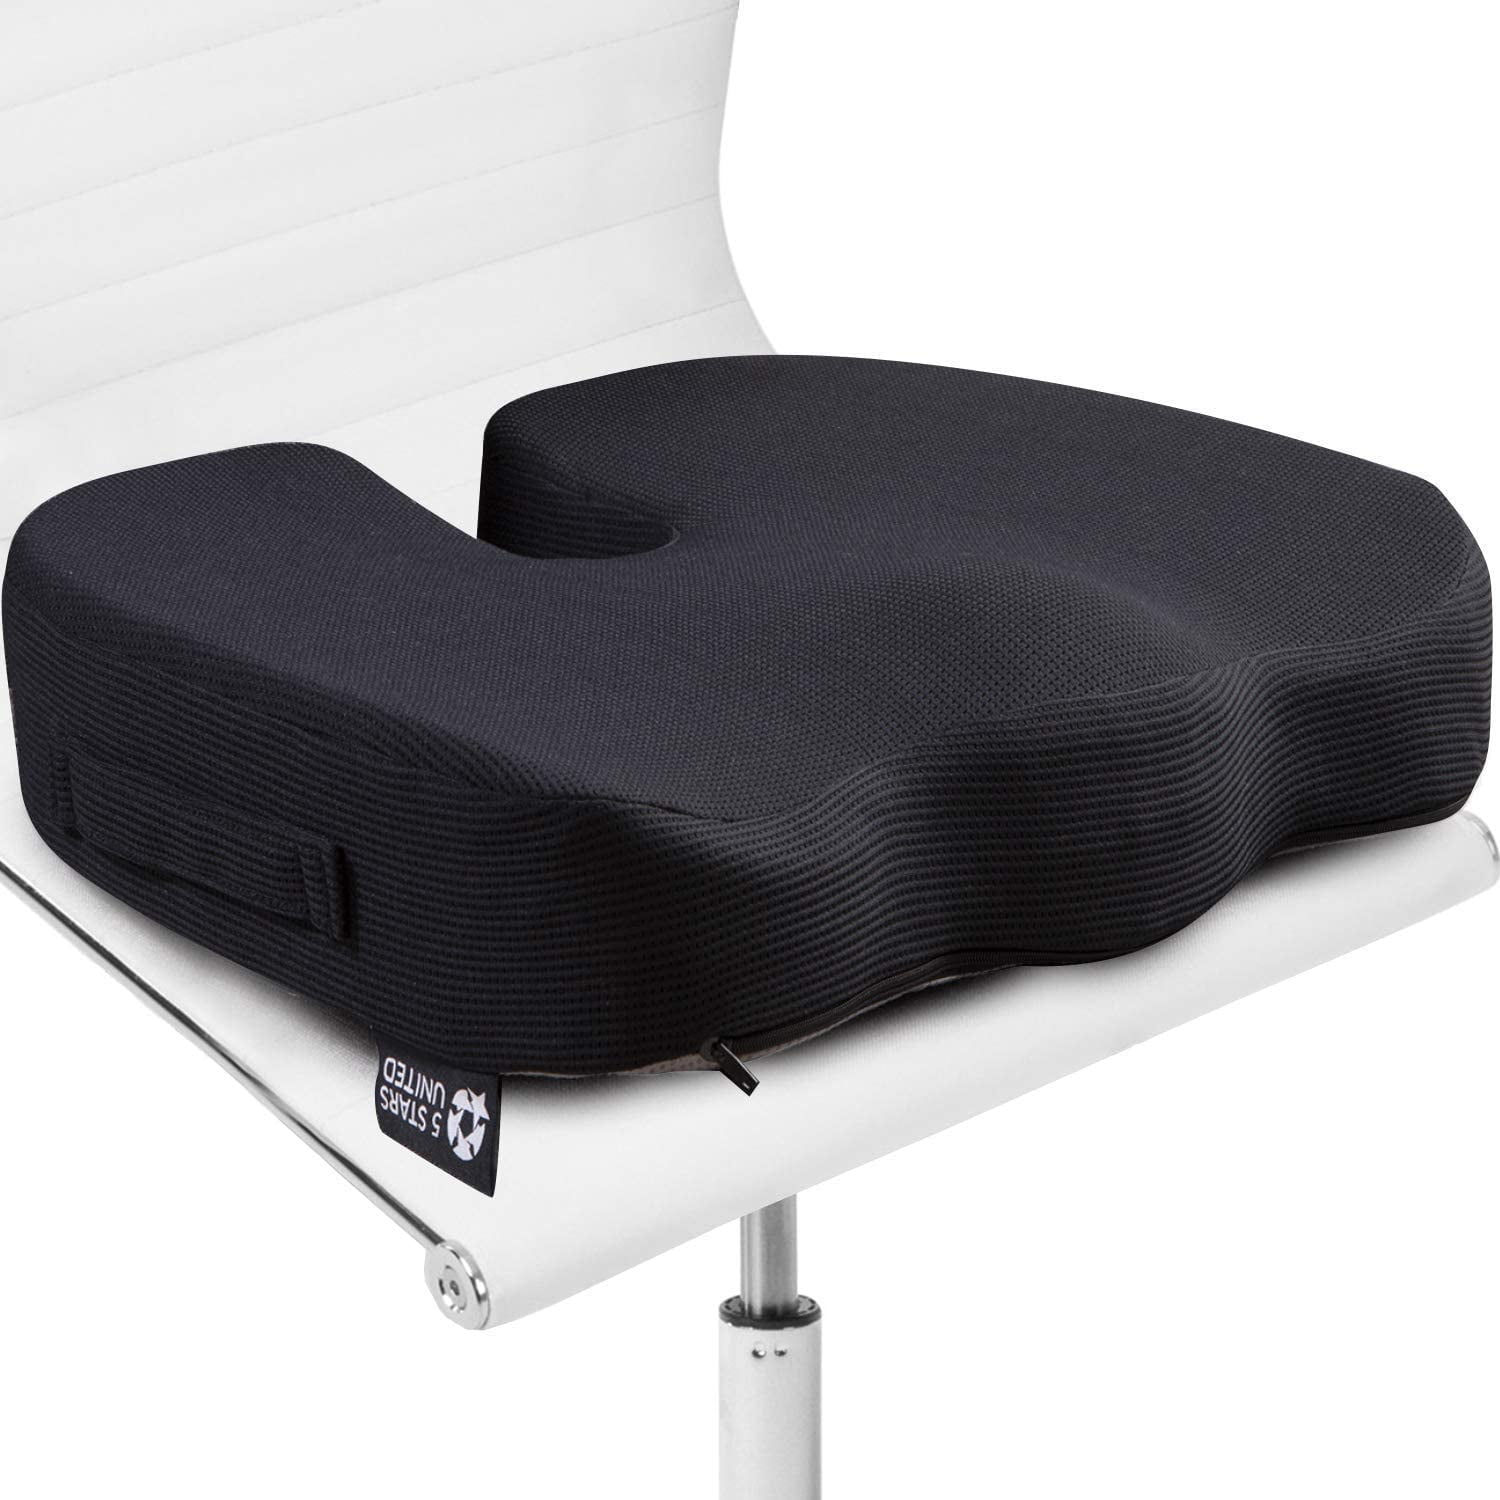 Gaming and Car Seat Pad Improve Posture And Comfort Cooling Gel Memory Foam Breathable Cover. Sciatica Pain Relief Pillow Office Chair Seat Cushion Coccyx Cushion for Tailbone Pain The Platform 